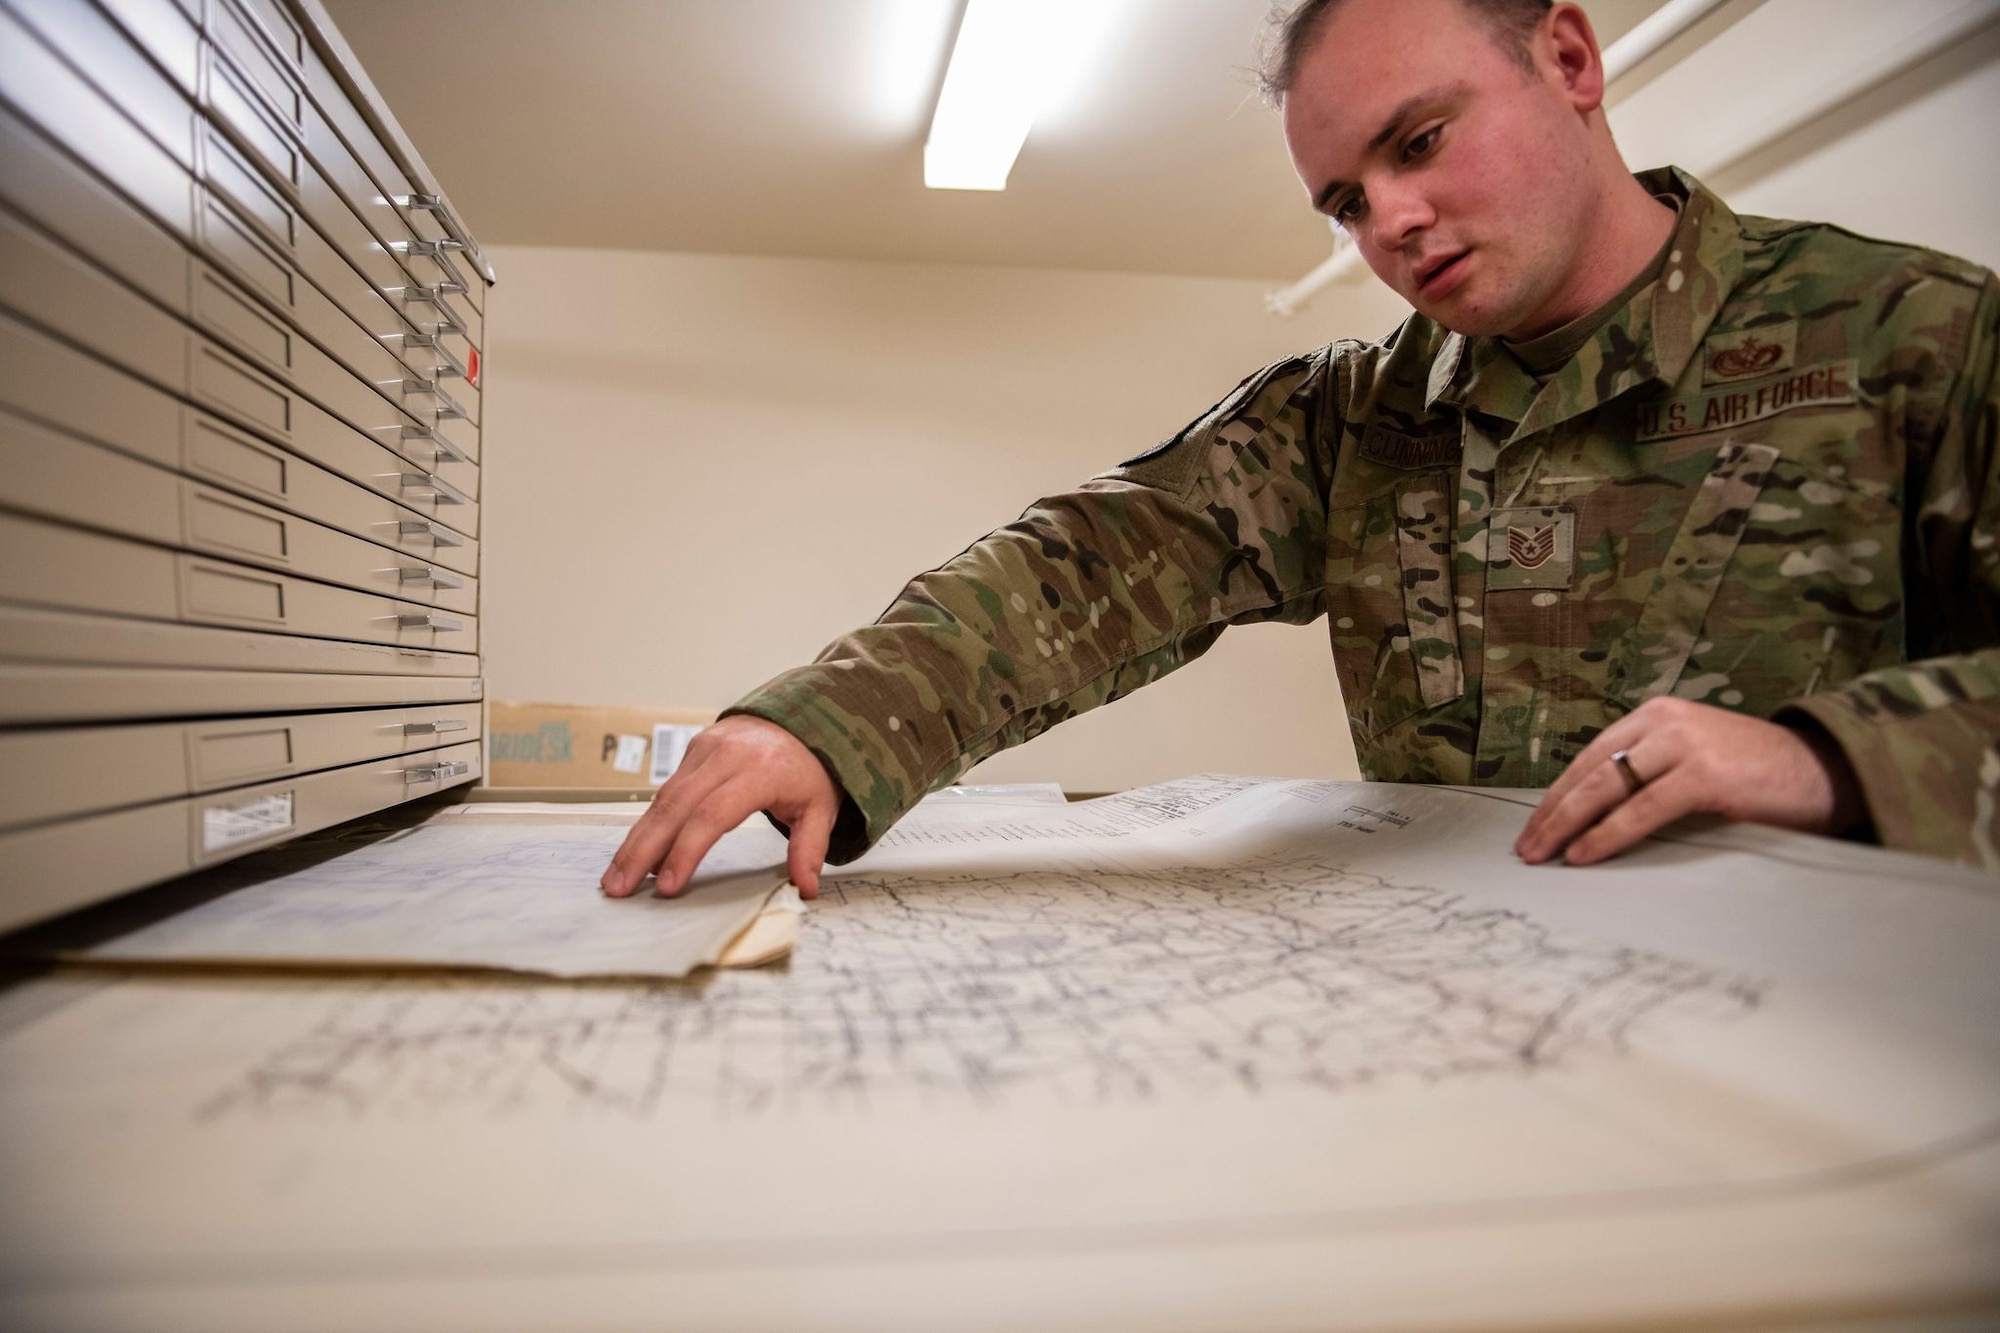 Tech. Sgt. Kevin Cuningham, 9th Civil Engineer Squadron noncommissioned officer in charge of Execution Support, pulls a map out of a cabinet on Beale Air Force Base.